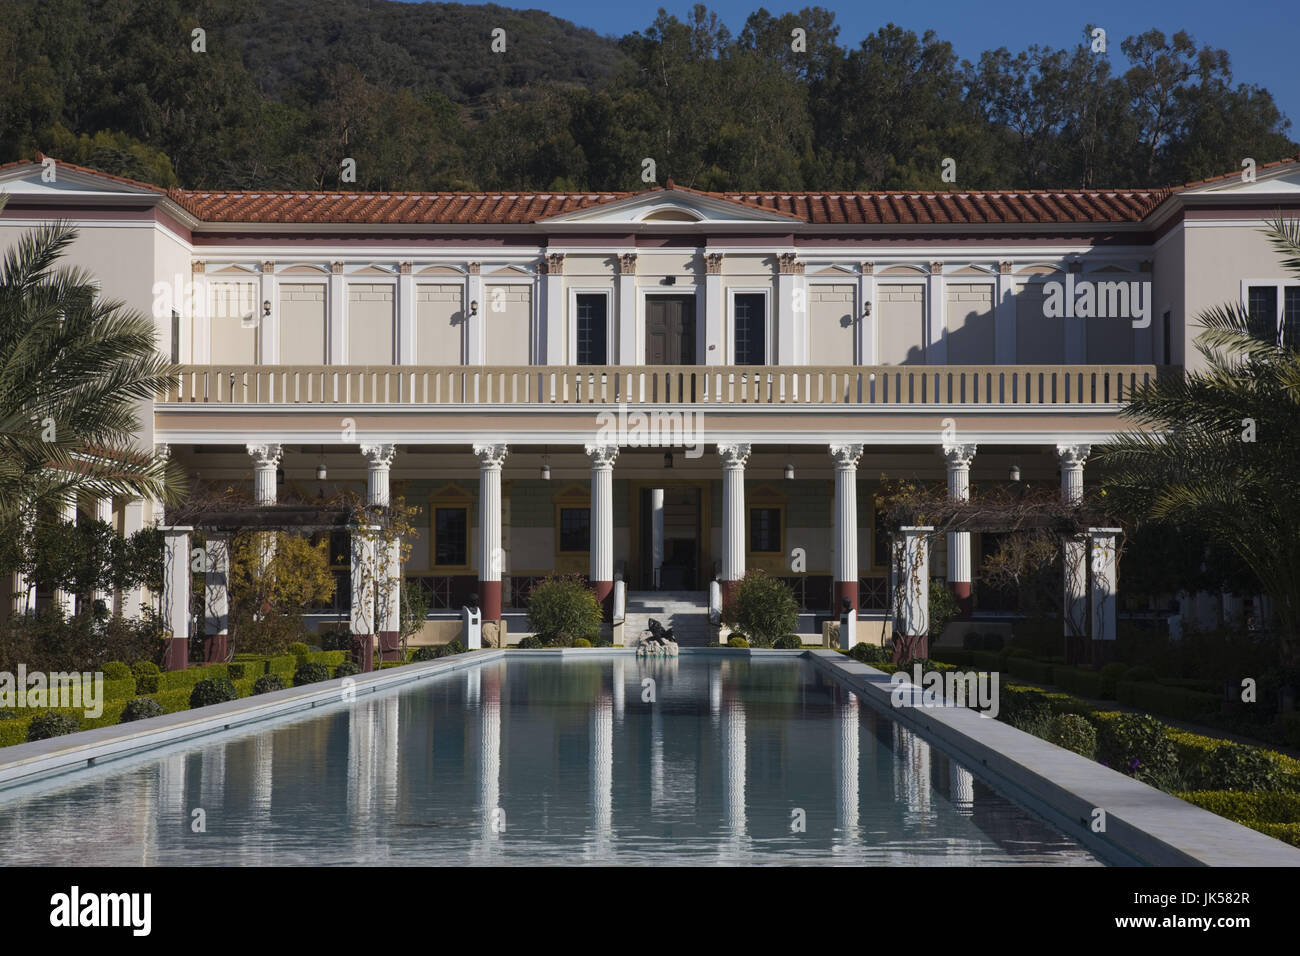 USA, California, Los Angeles, Pacifc Palisades, Getty Villa Museum, collection of oil tycoon J. Paul Getty Stock Photo